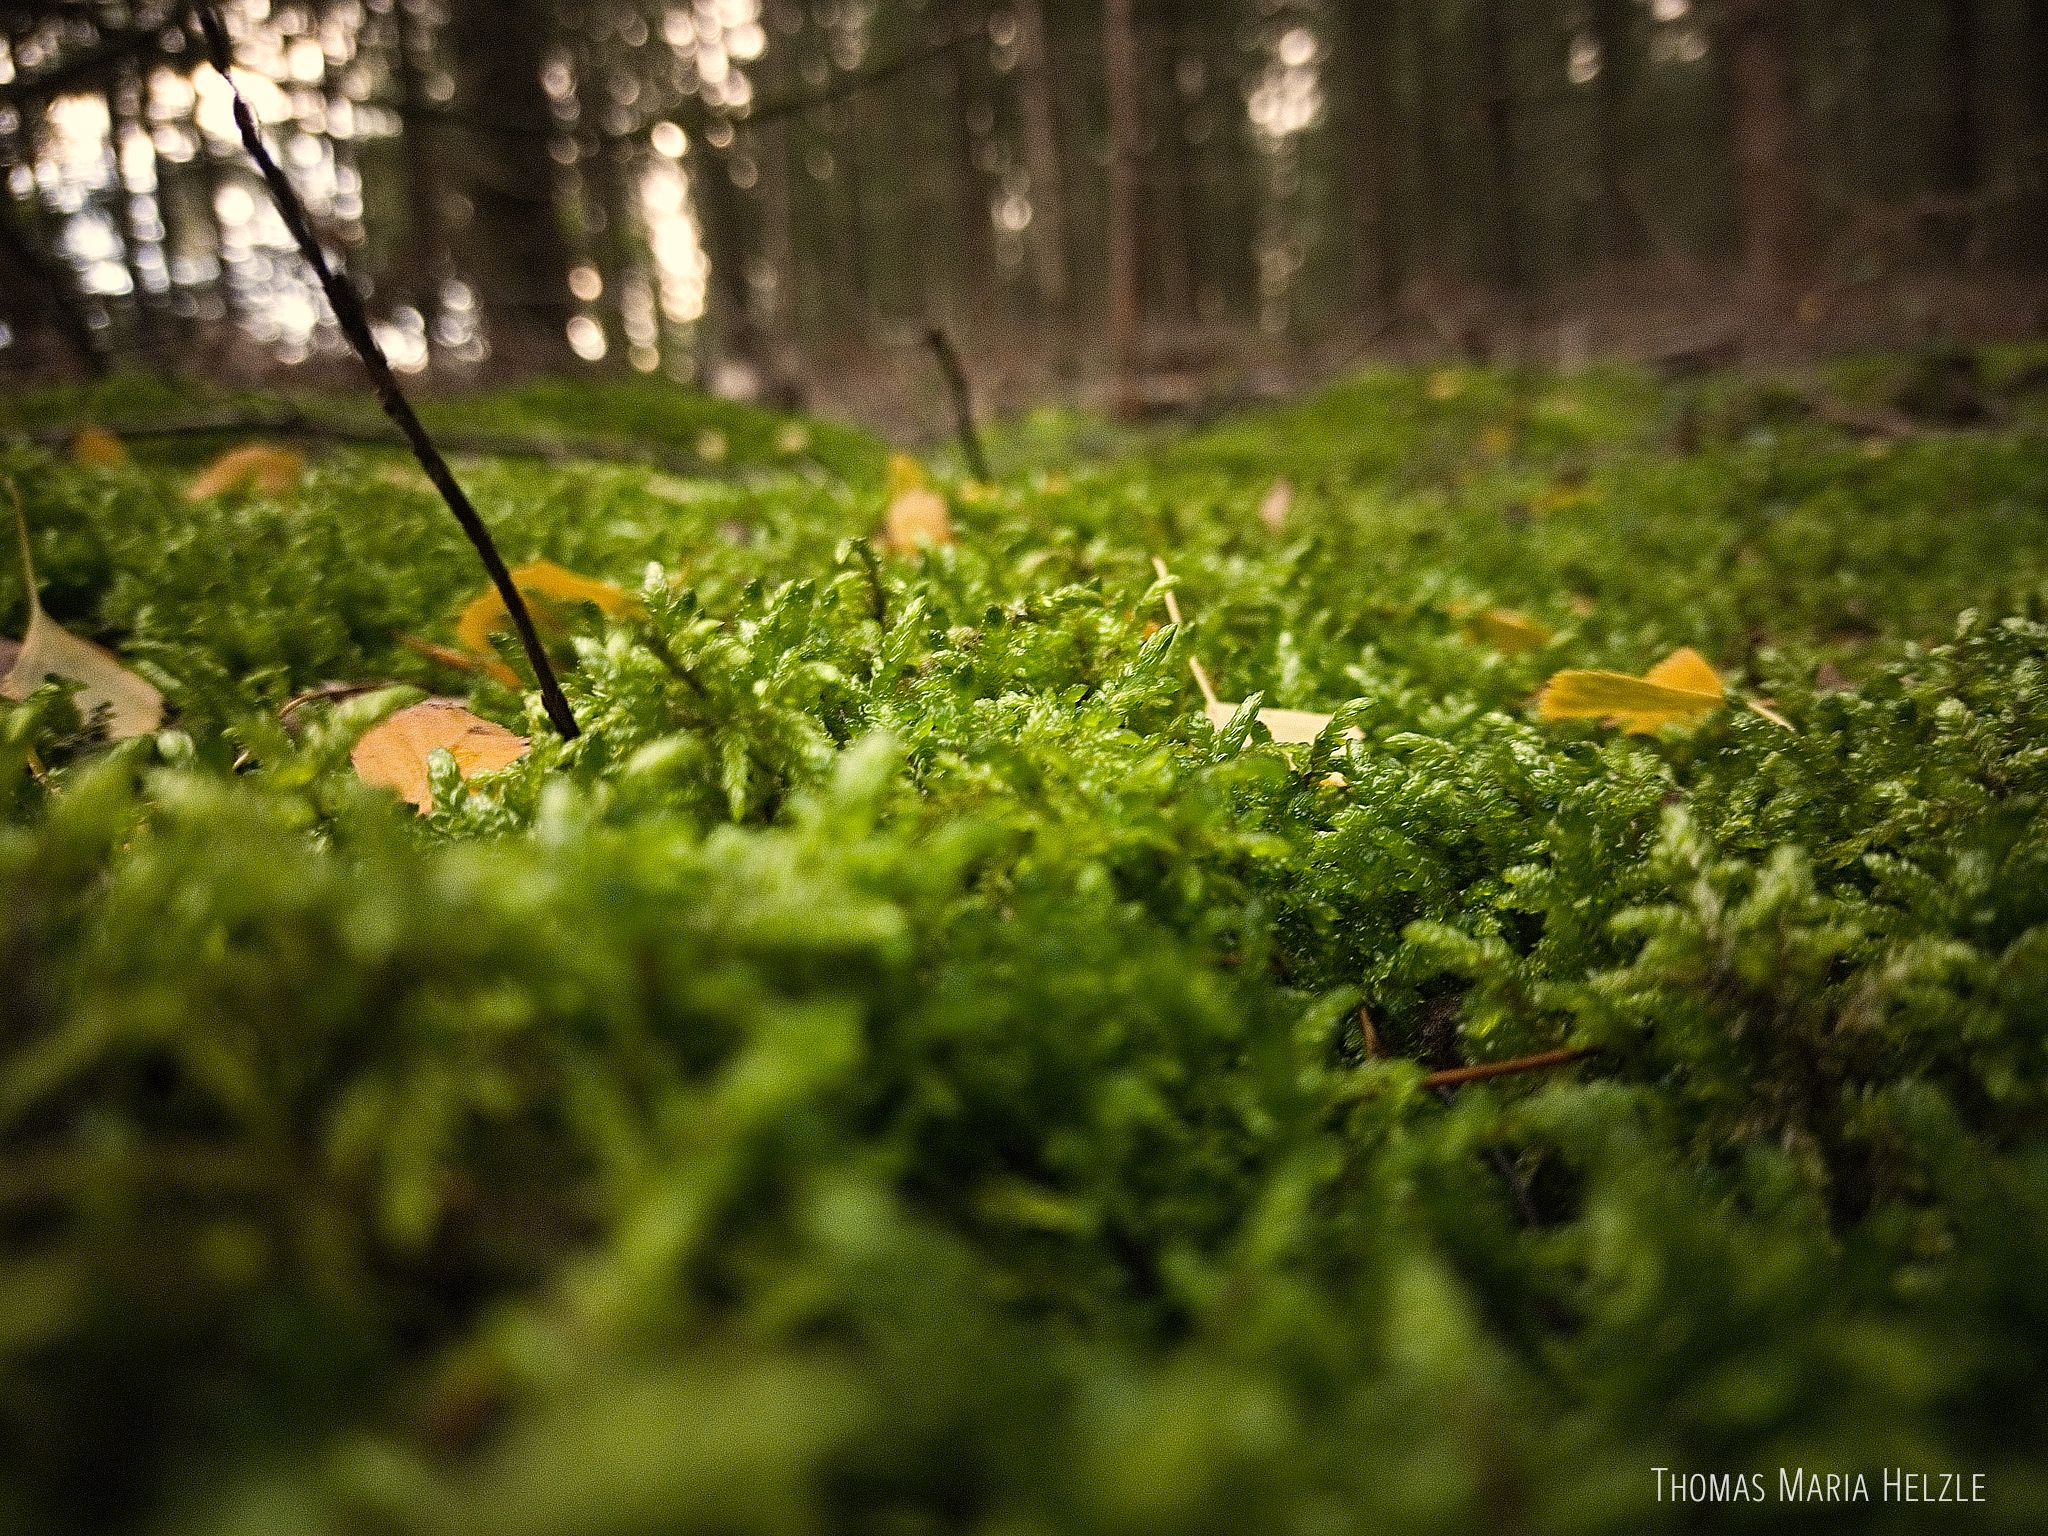 A macro shot from the eye-level of moss on the forest floor with small leaves and little branches strewn about.